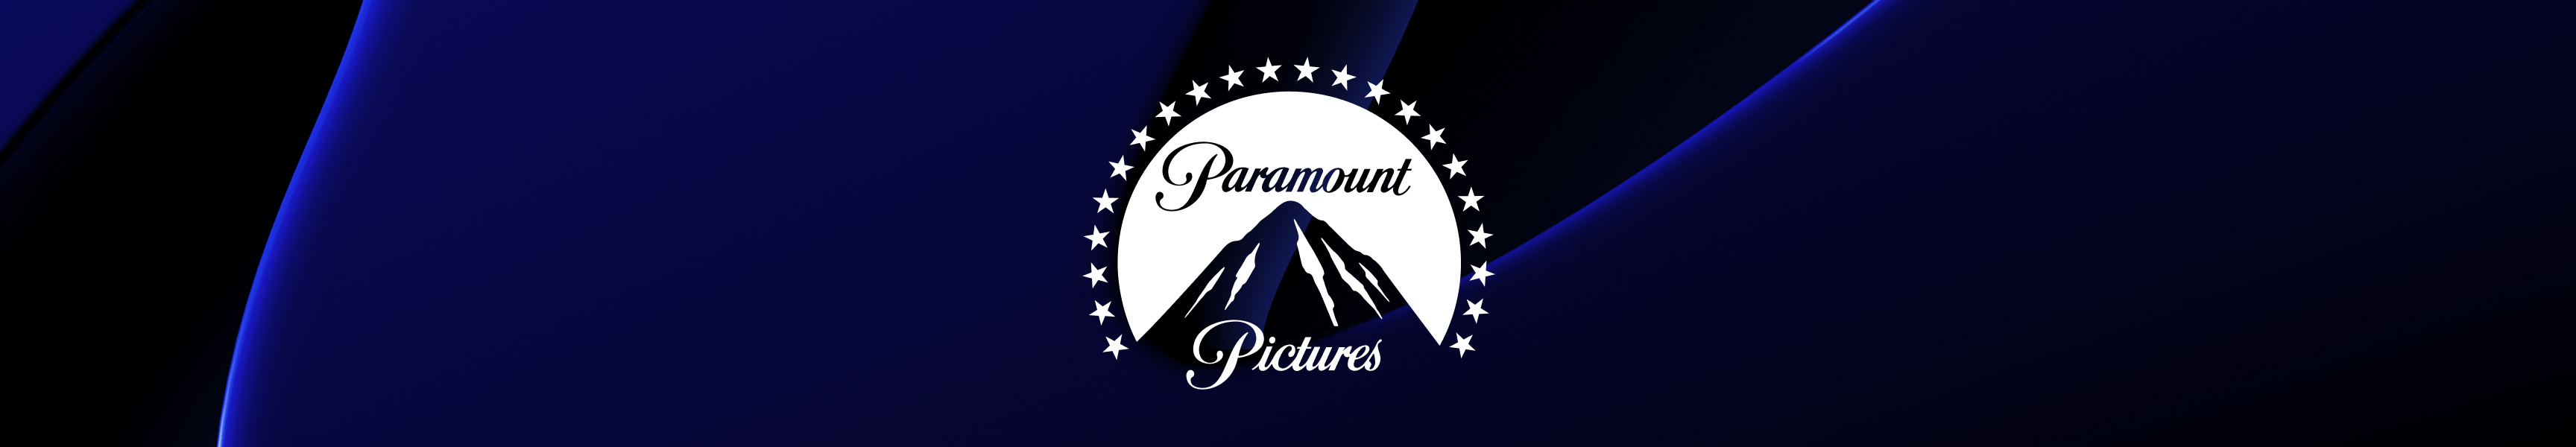 Paramount Pictures Kleidung